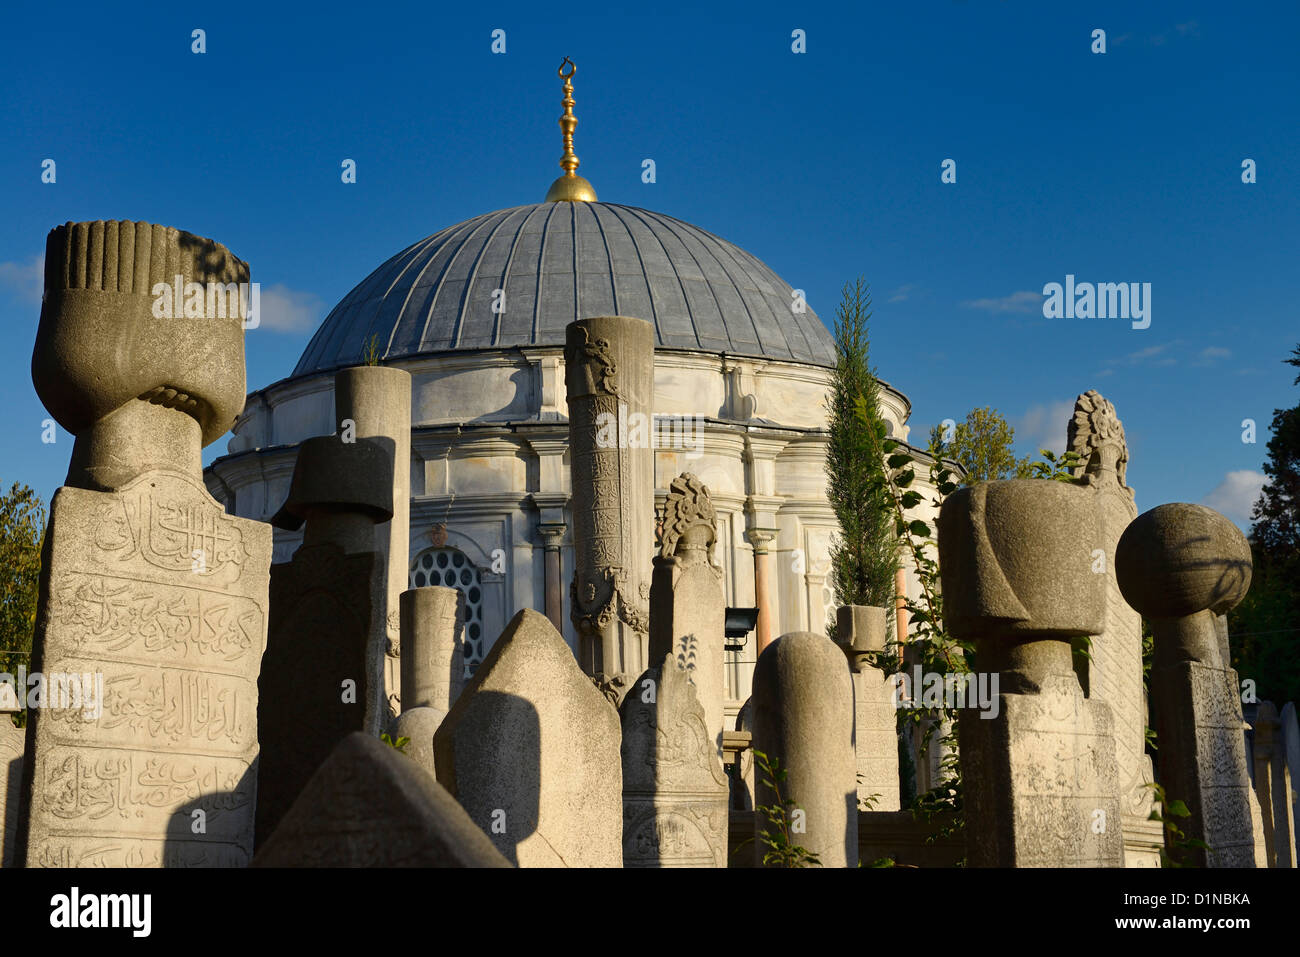 Sun on grave stones and Mausoleum in the Ottoman cemetery at Eyup Sultan Mosque Istanbul Turkey Stock Photo